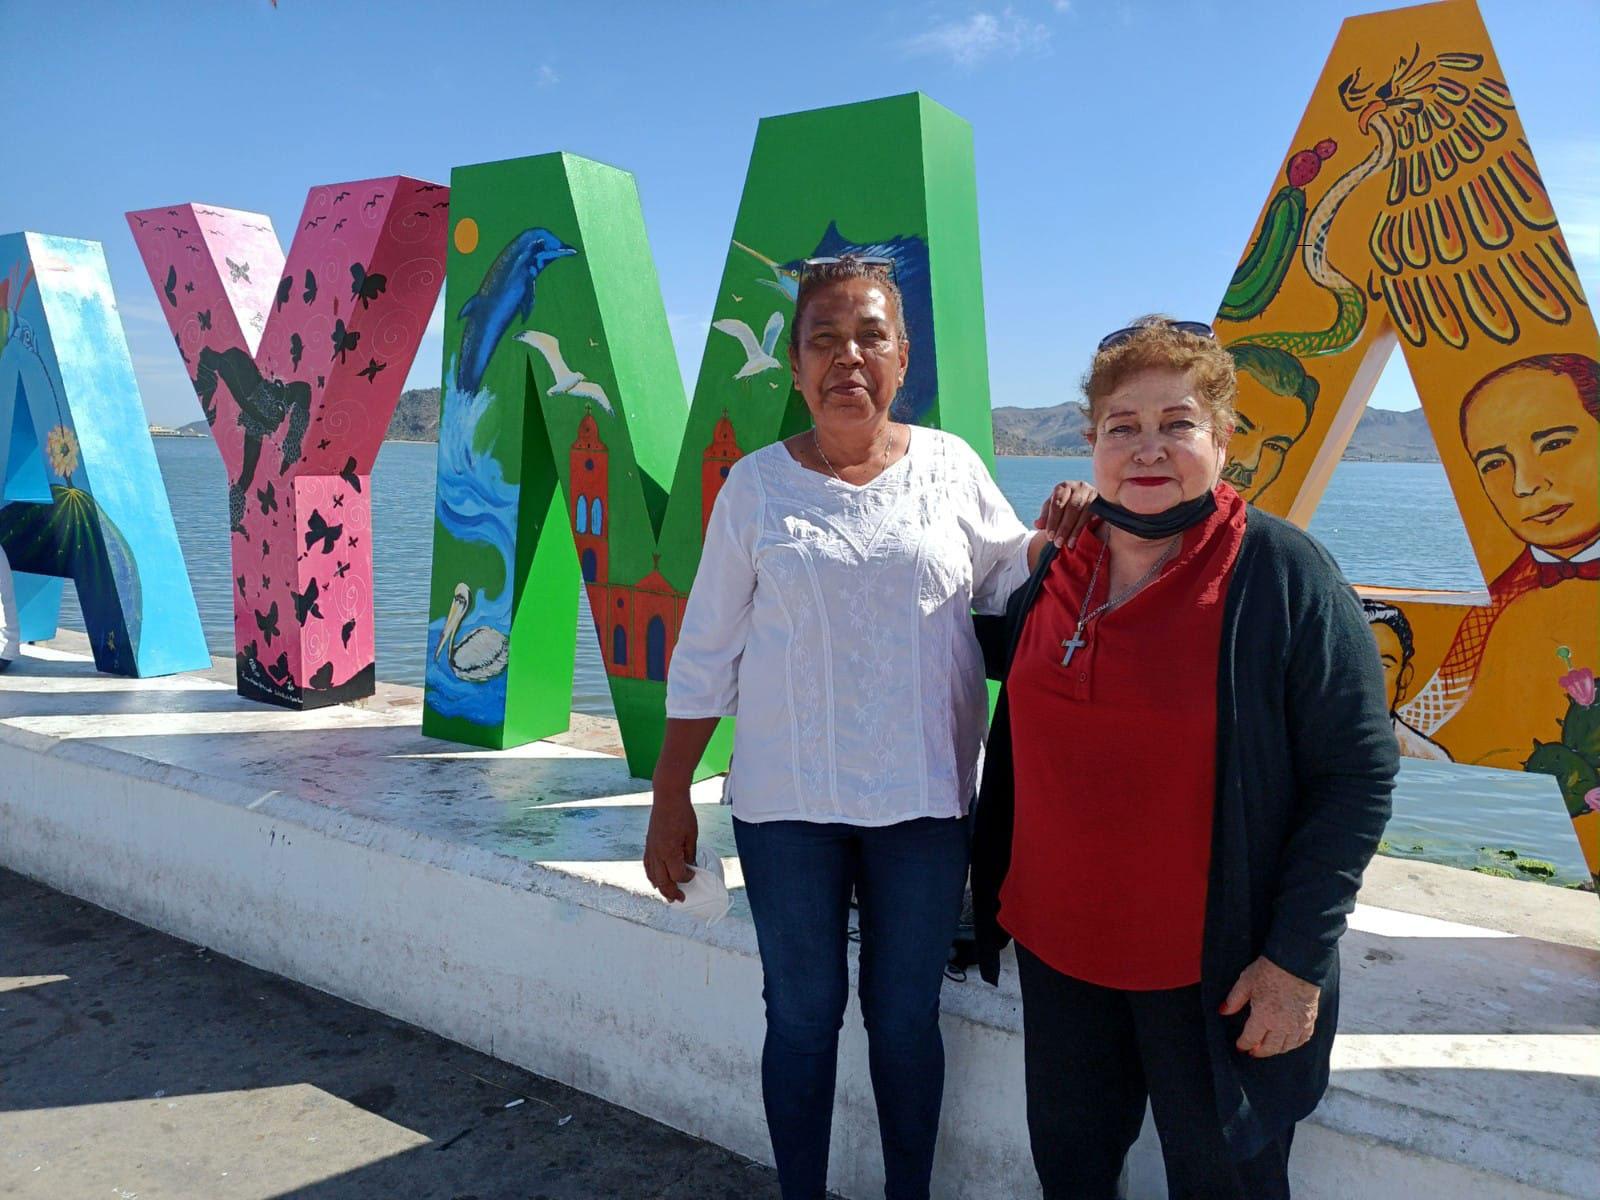 Maria Beatriz Collins (left) and Manuela Ojeda Amador (right) are leaders of two fishing cooperatives in Guaymas.